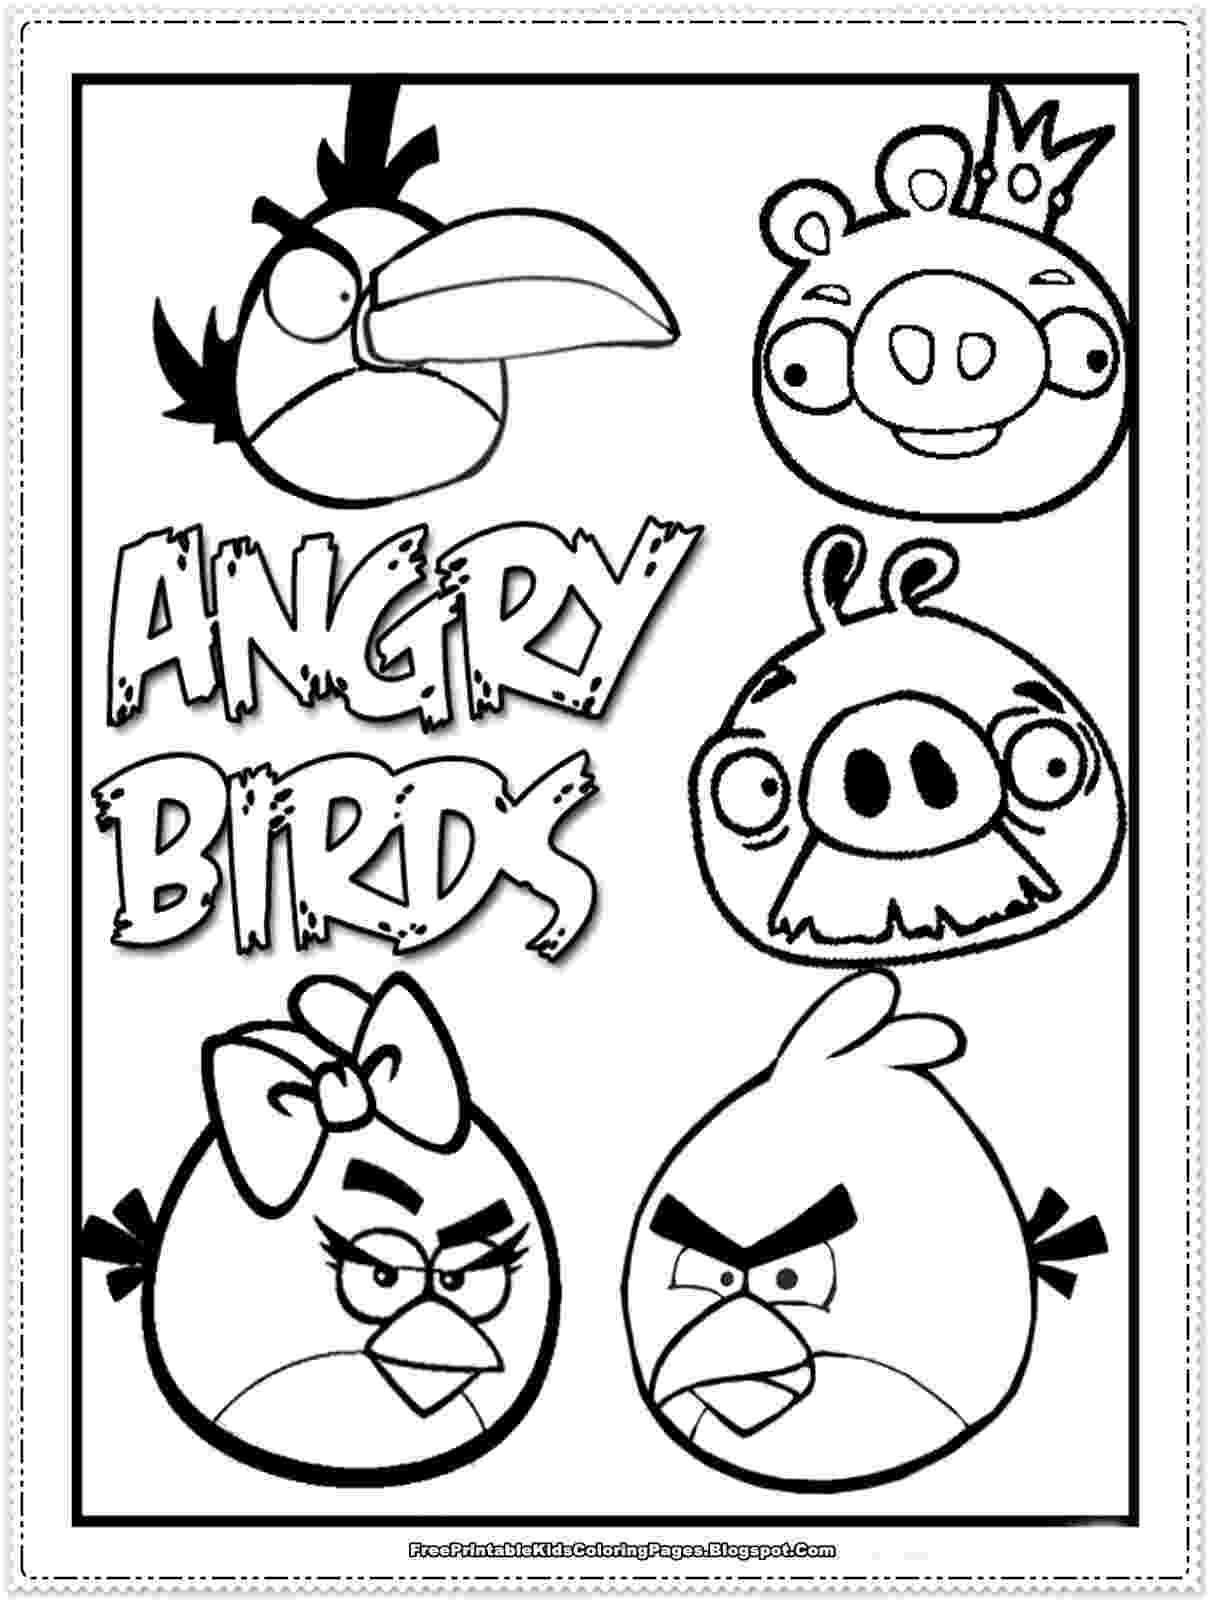 bird color page bird coloring pages to download and print for free bird page color 